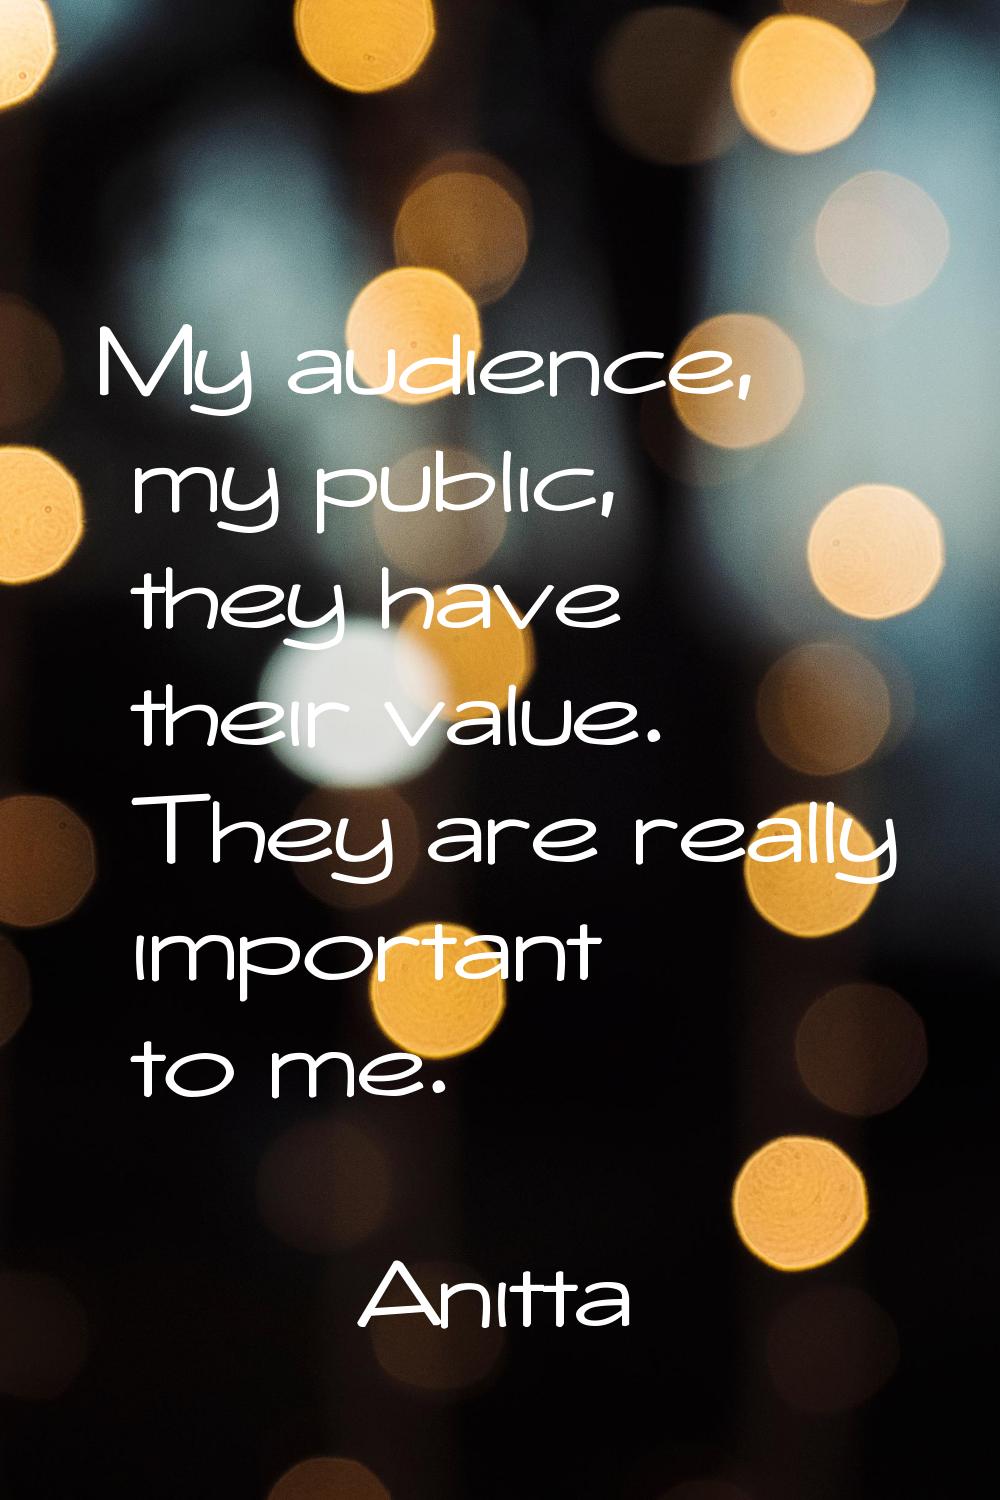 My audience, my public, they have their value. They are really important to me.